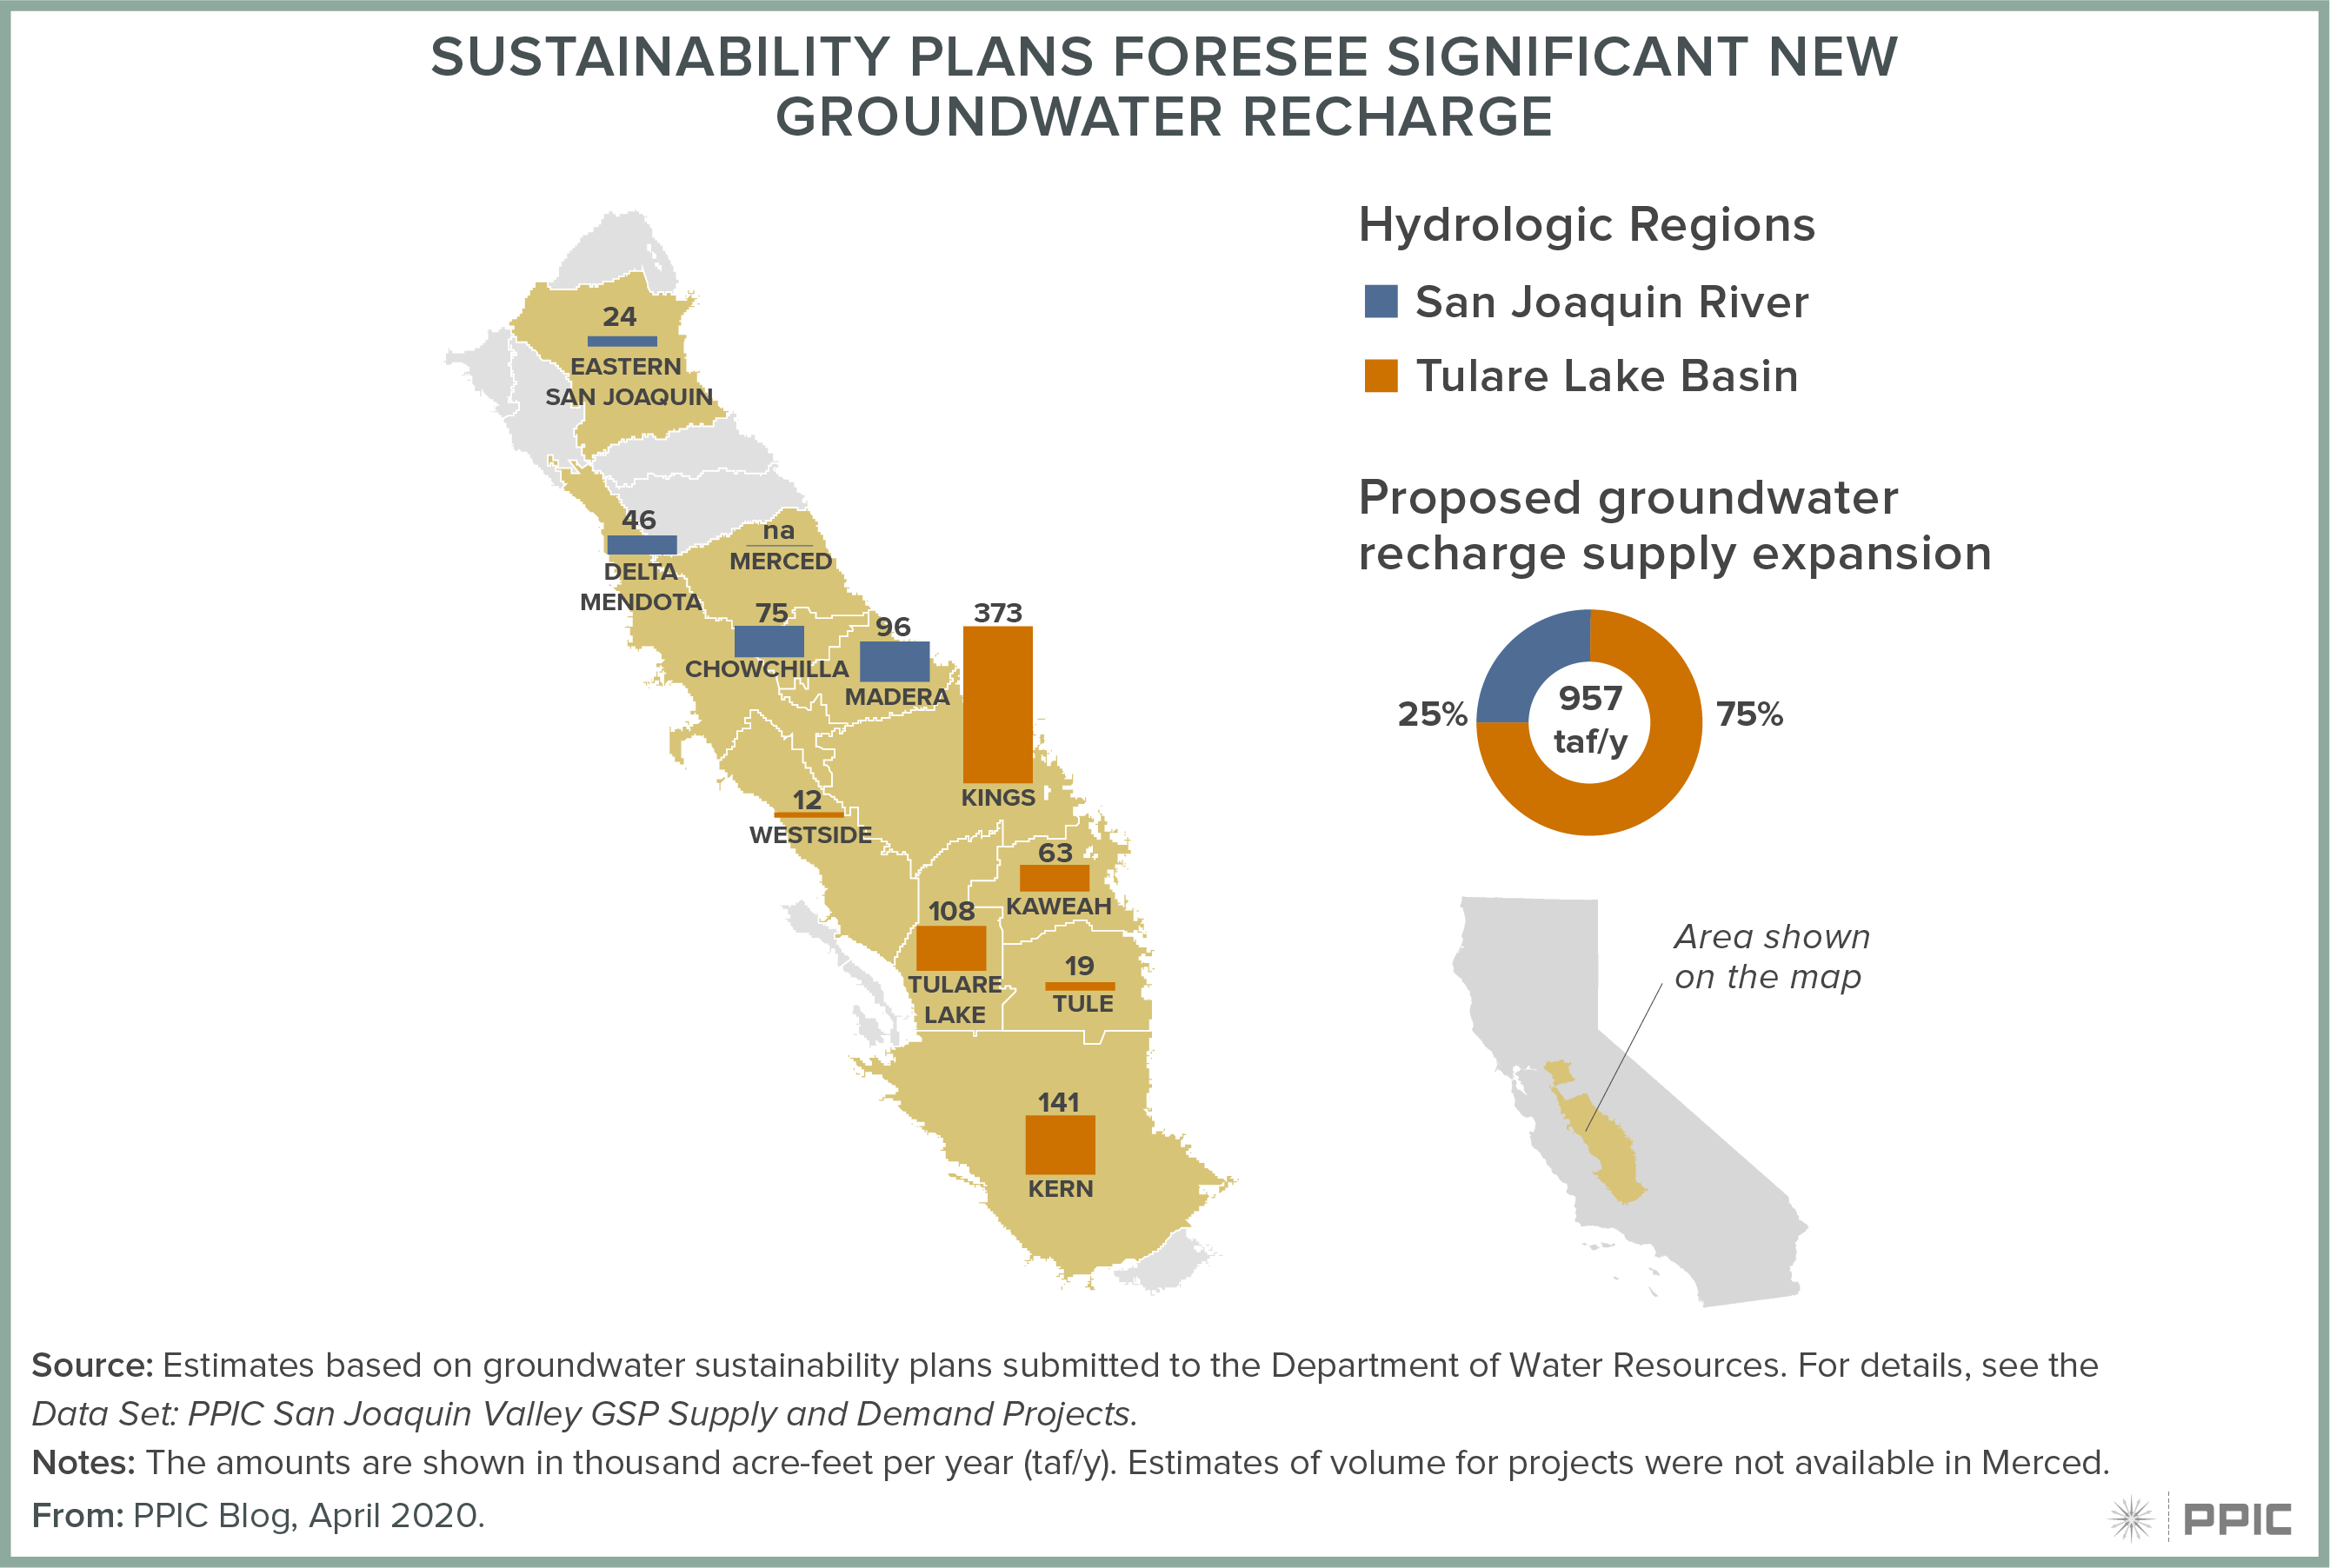 figure - Sustainability Plans Foresee Significant New Groundwater Recharge